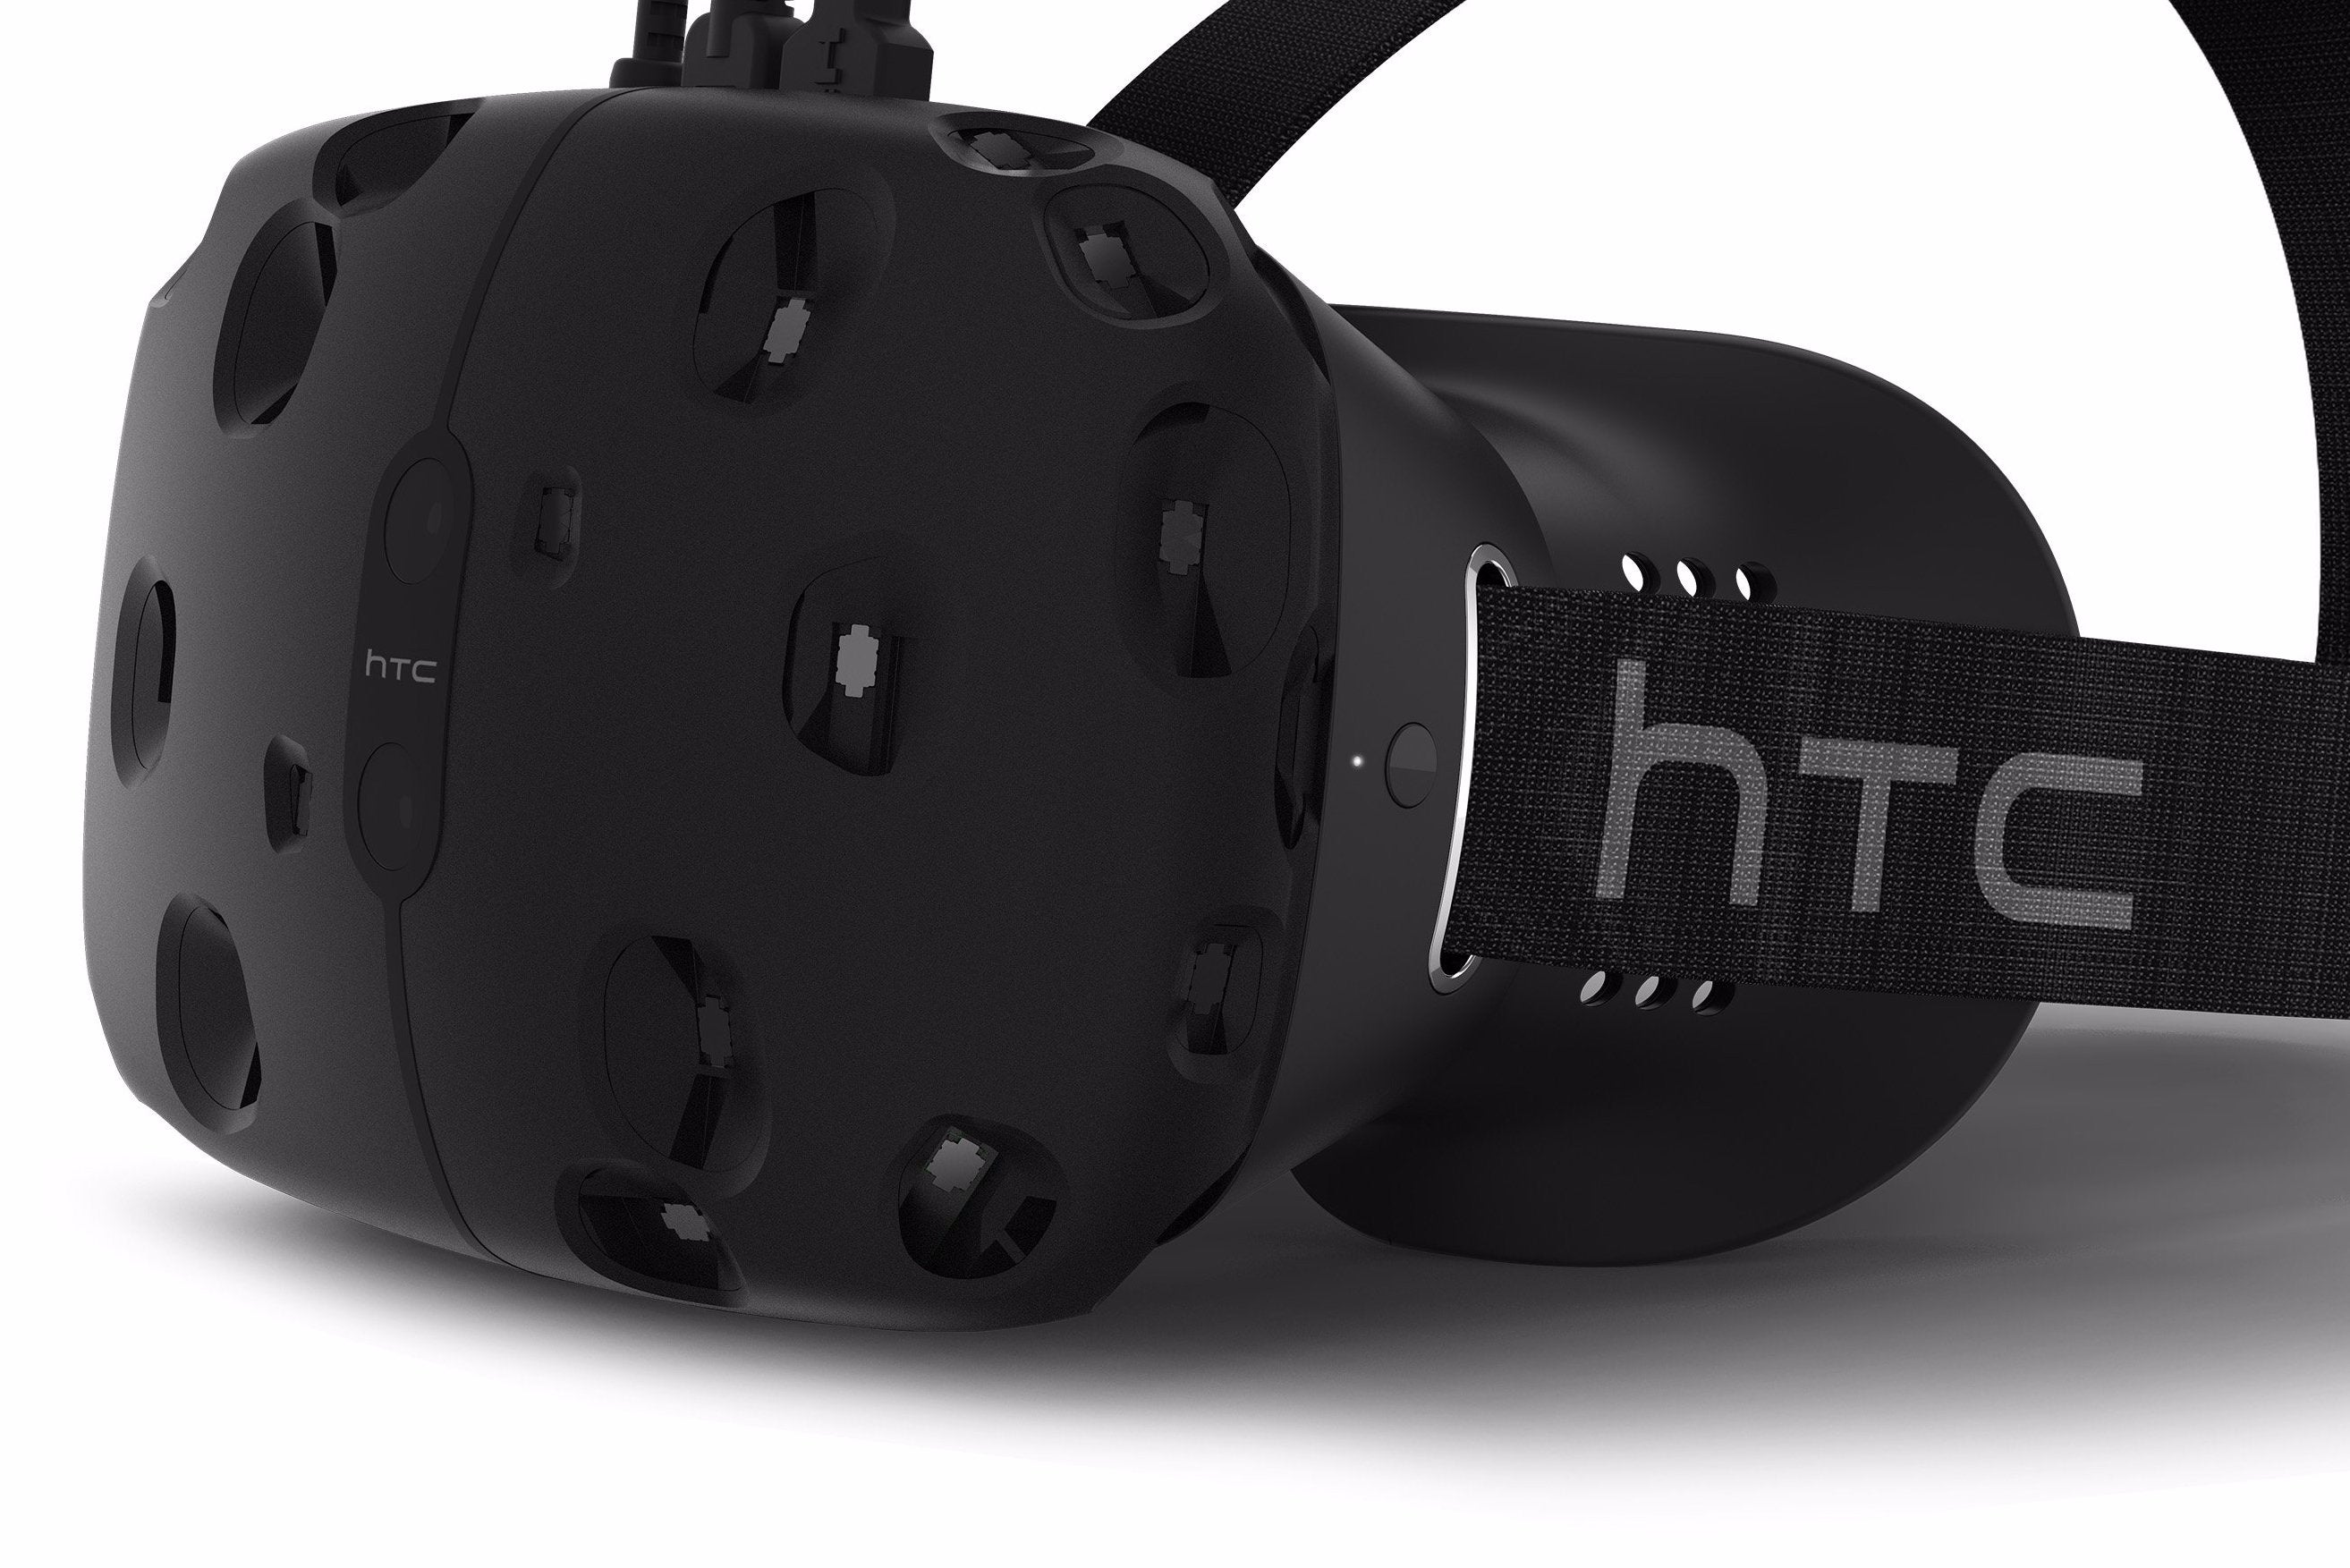 Image for Valve's virtual reality headset Vive gets "limited release" in 2015